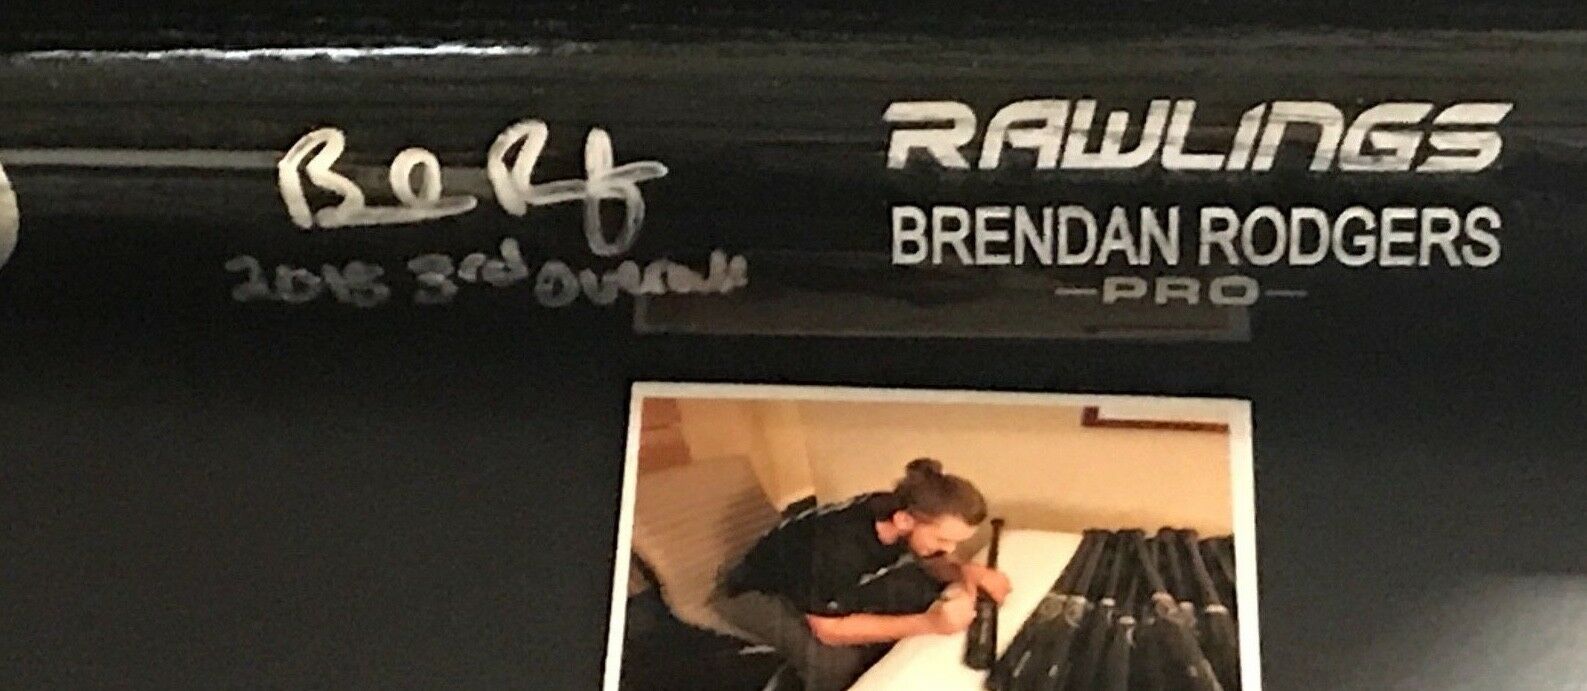 Brendan Rodgers Rockies Autographed Signed Black Full Size Bat 2015 3rd Overall